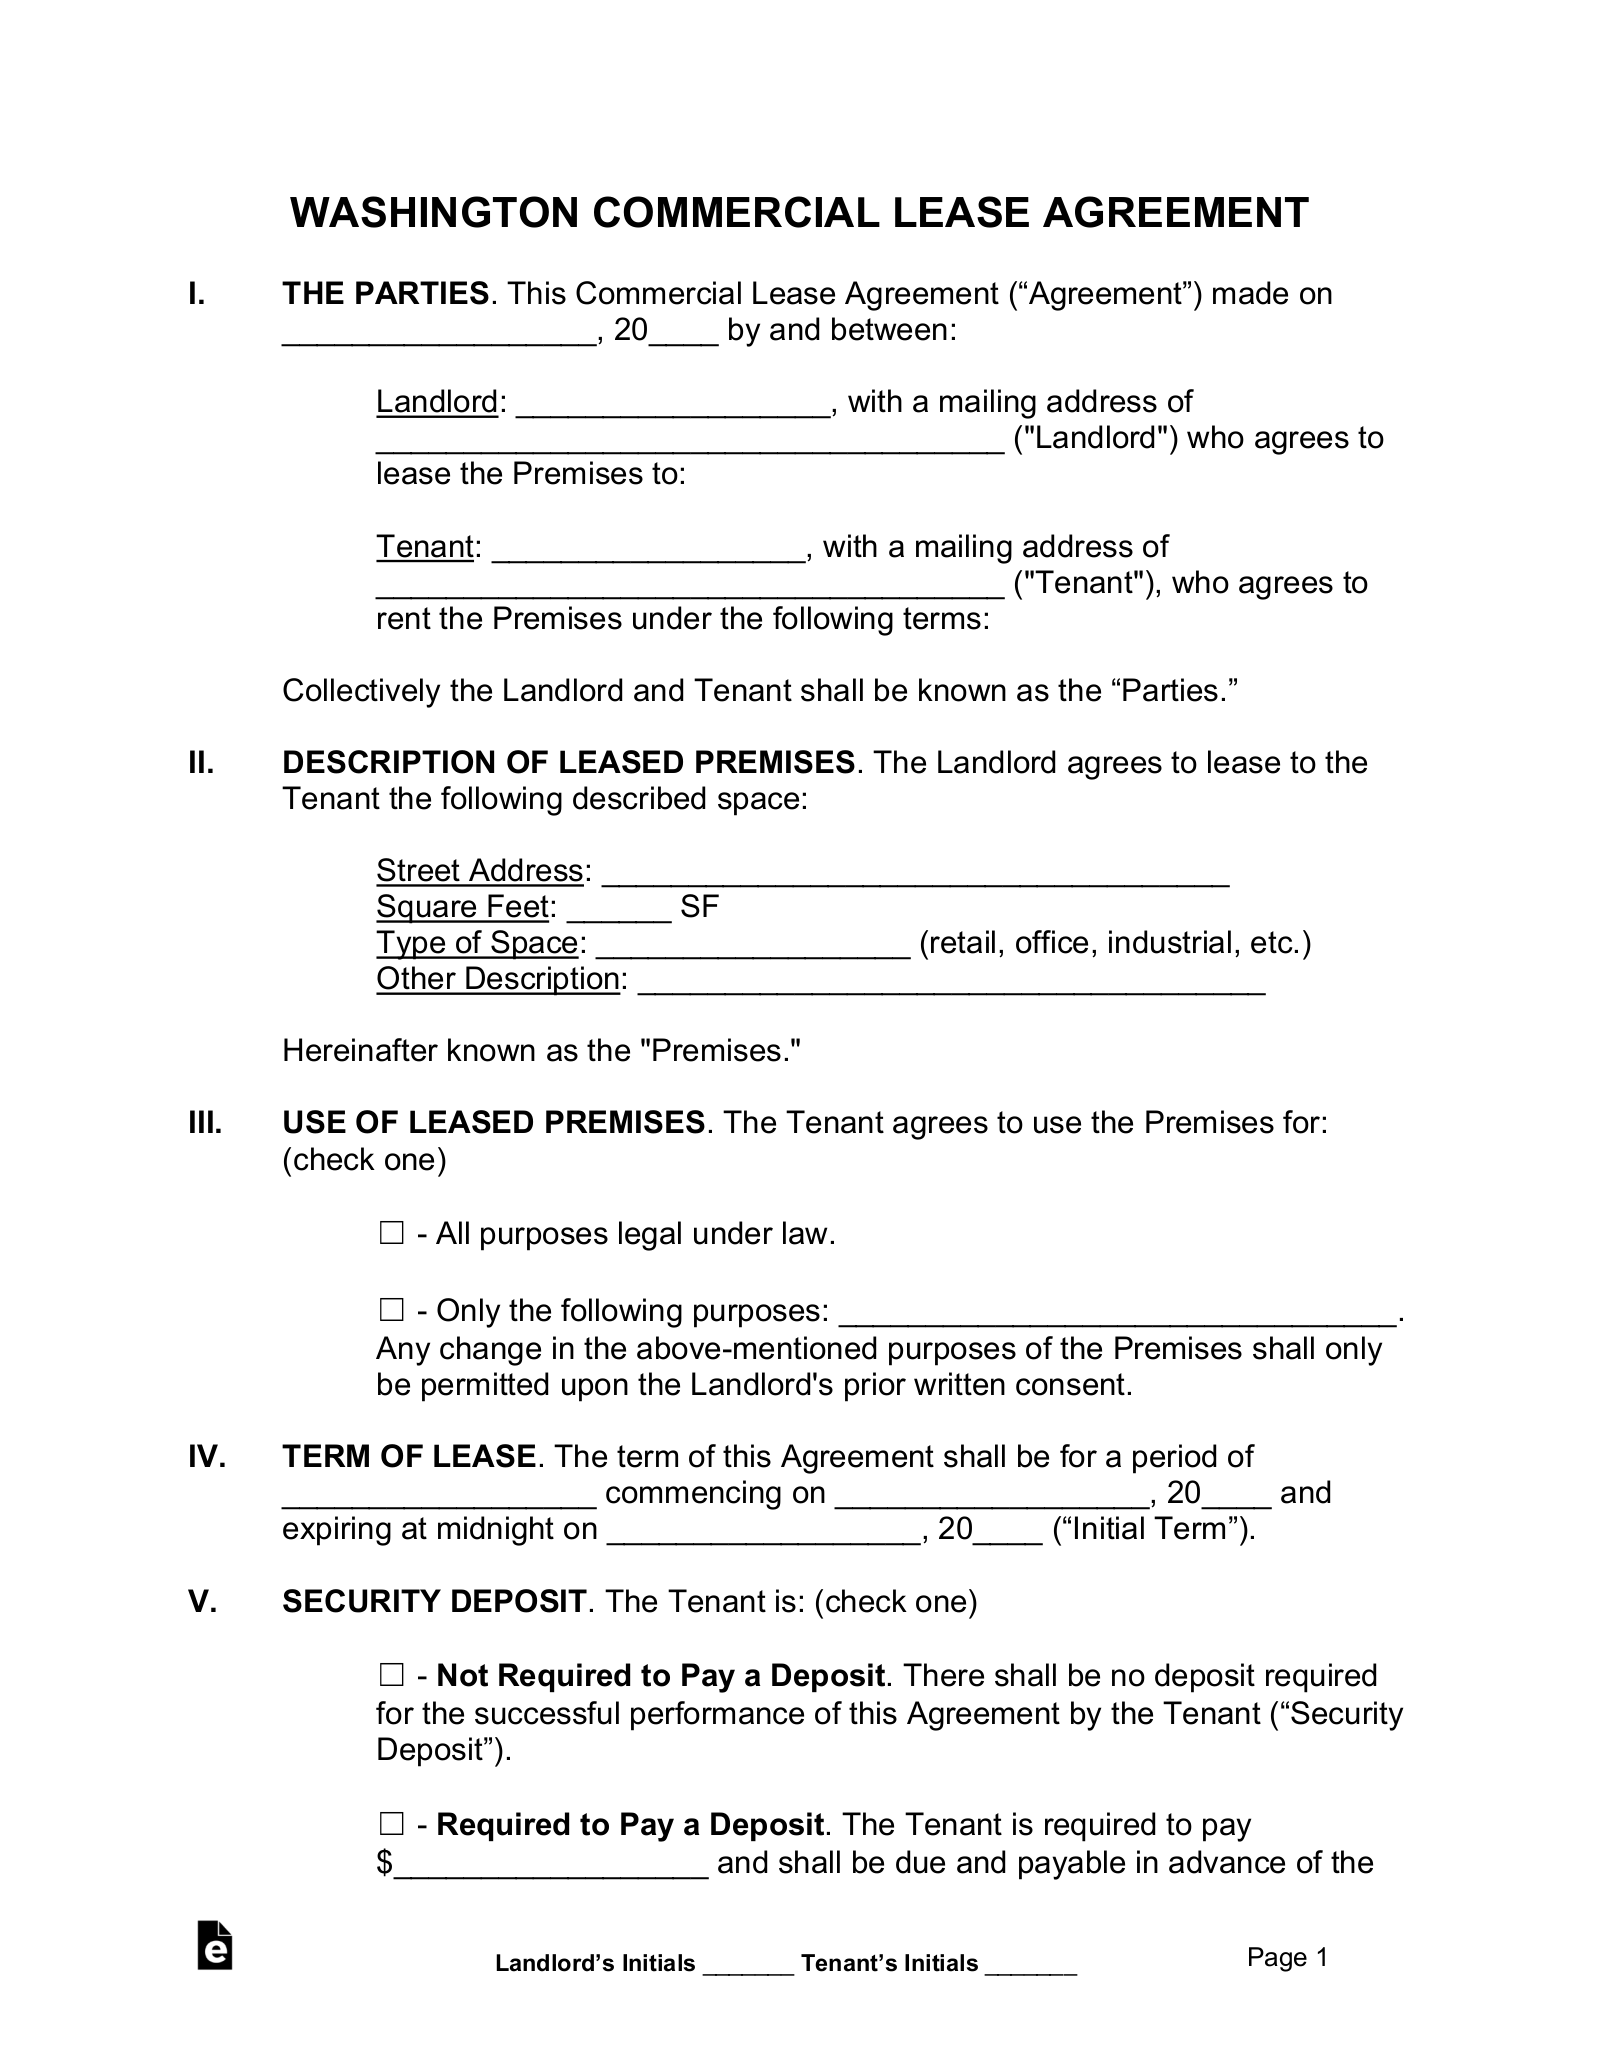 Washington Commercial Lease Agreement Form